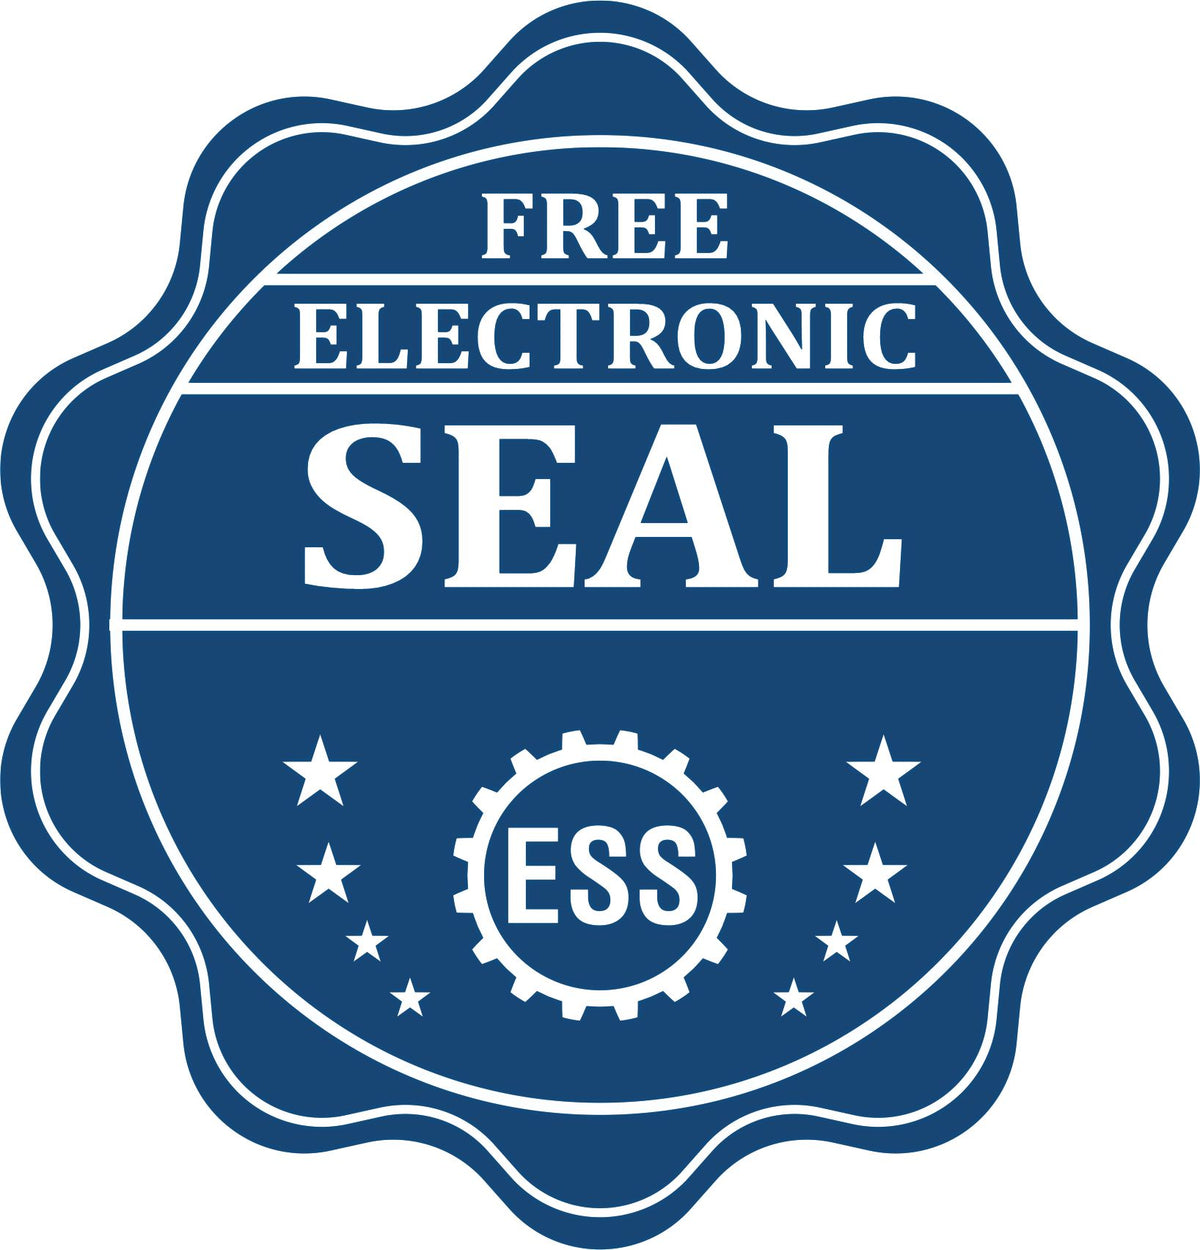 A badge showing a free electronic seal for the Long Reach Nebraska Geology Seal with stars and the ESS gear on the emblem.